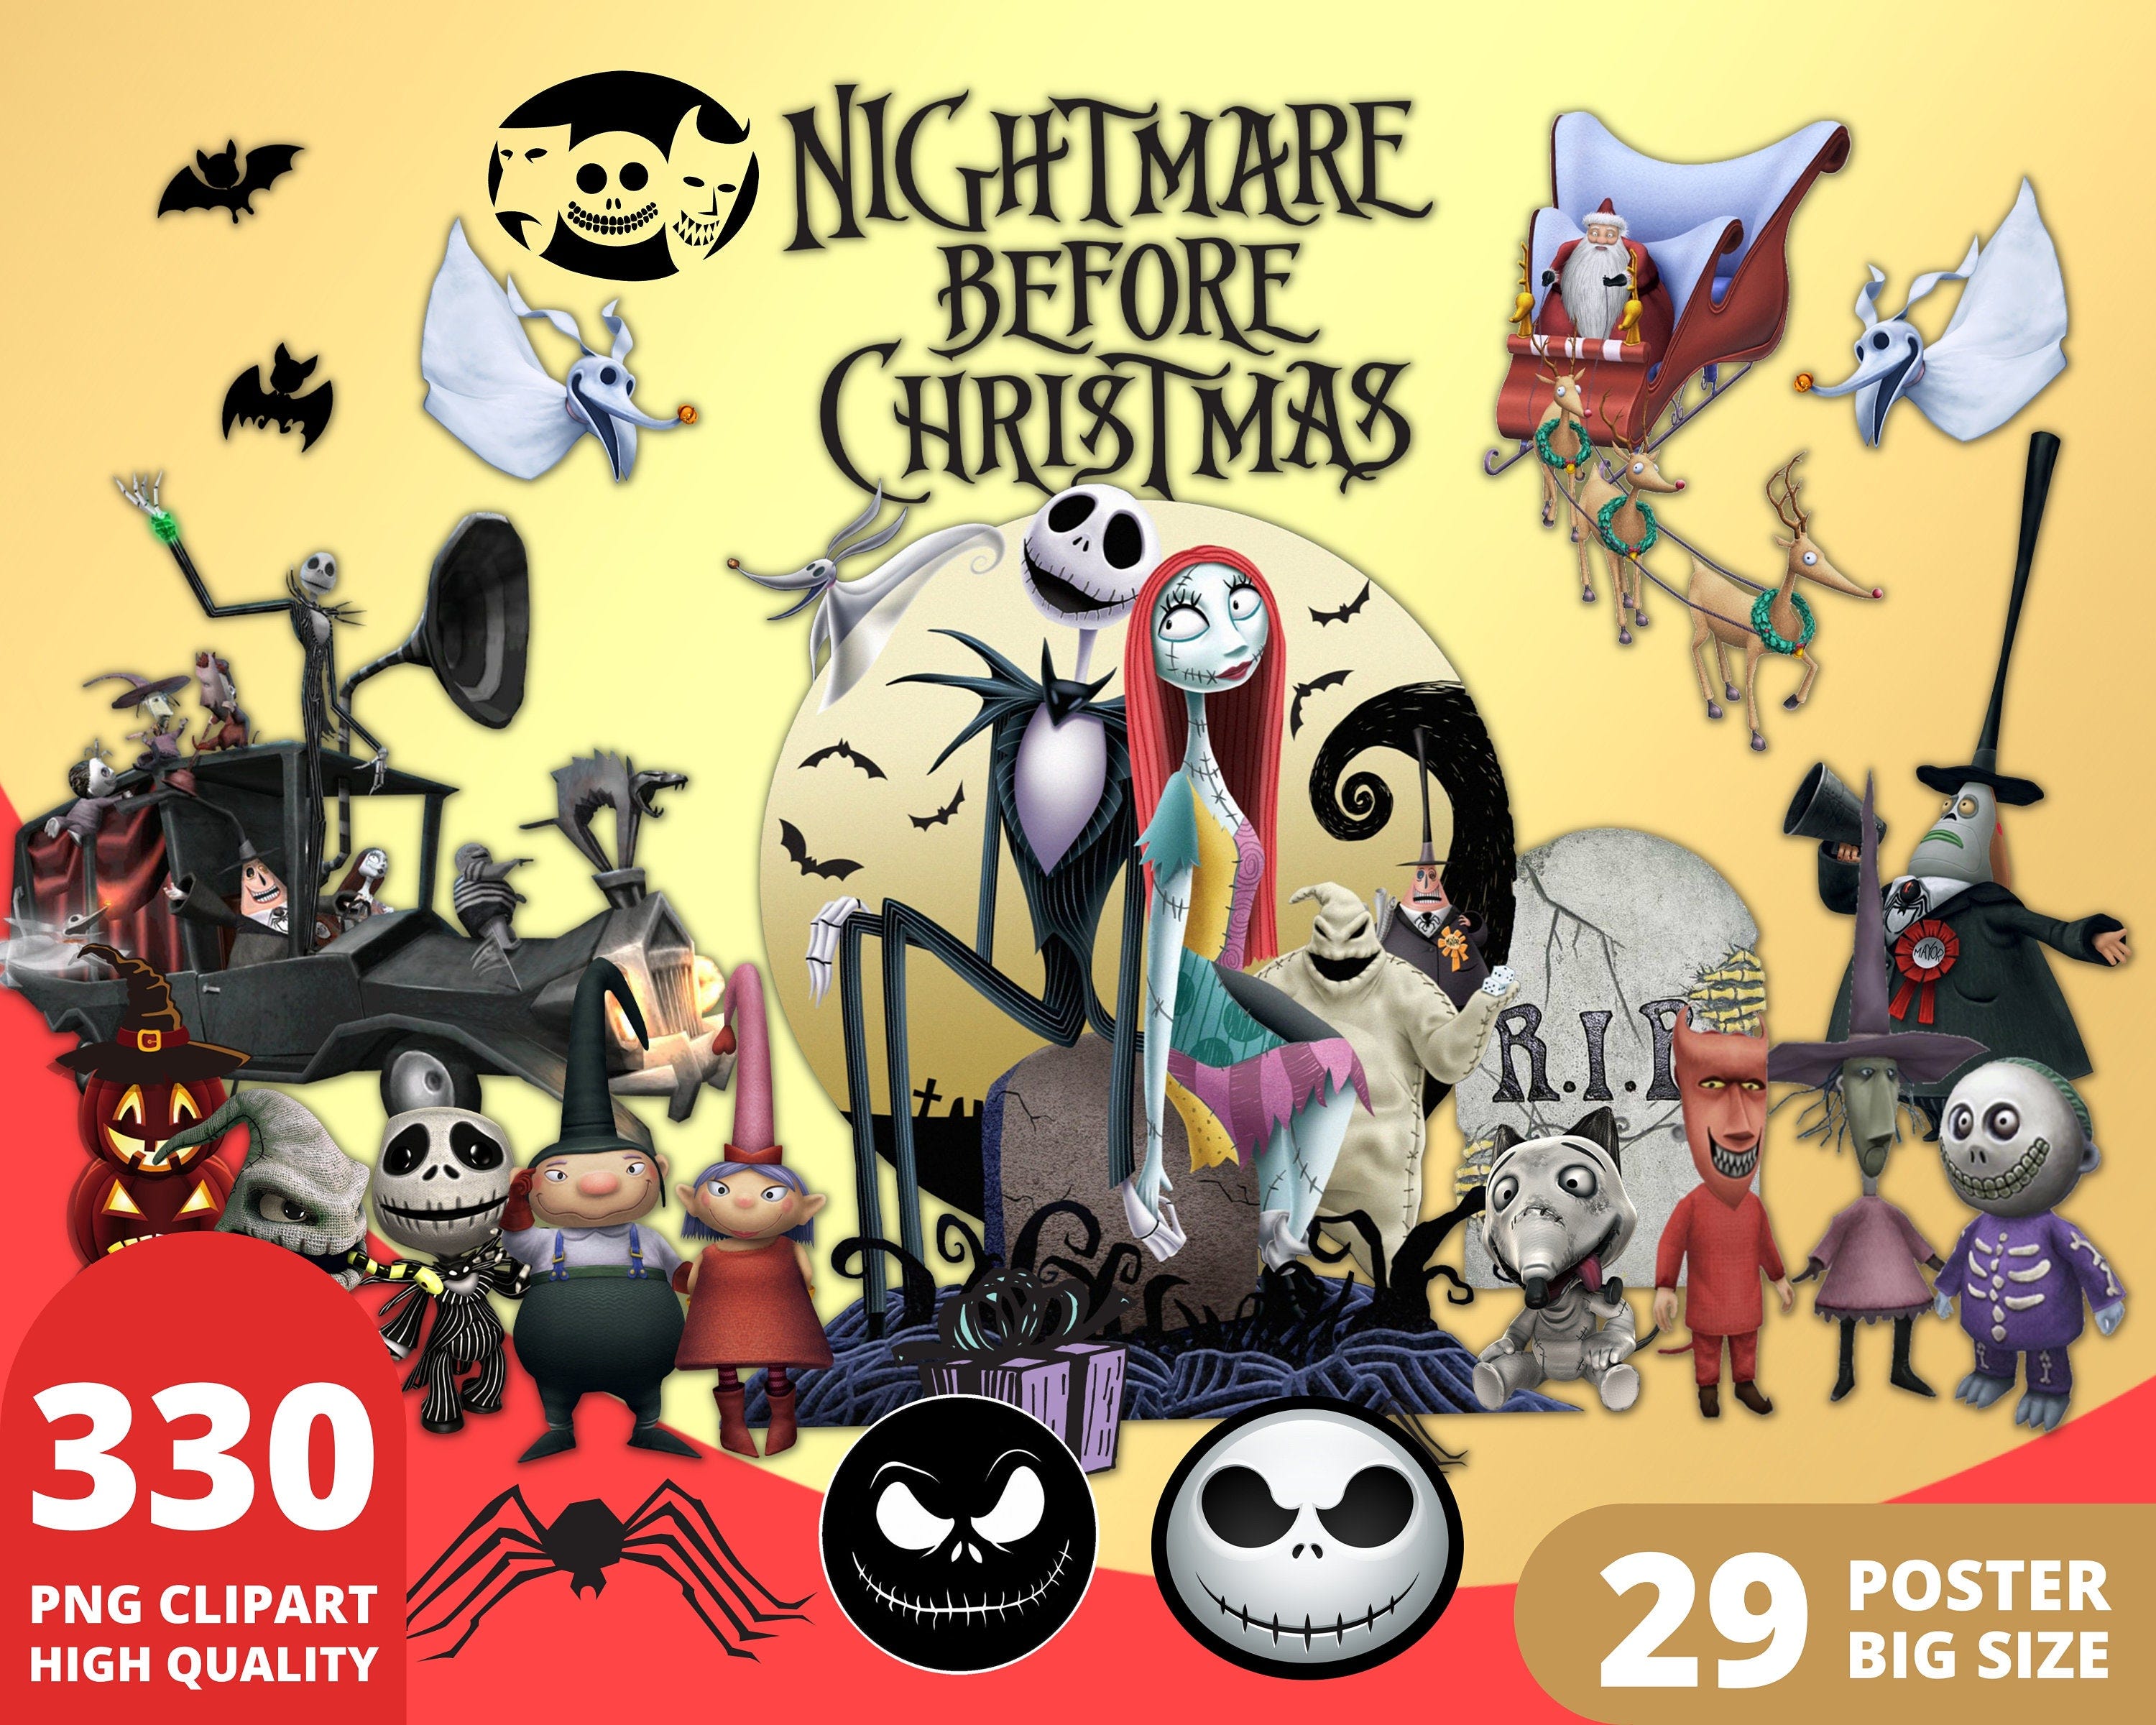 Nightmare Before Christmas Clipart PNG, Halloween Decorations, Skelleton, Jack and Sally Pattern, Nightmare Christmas Posters